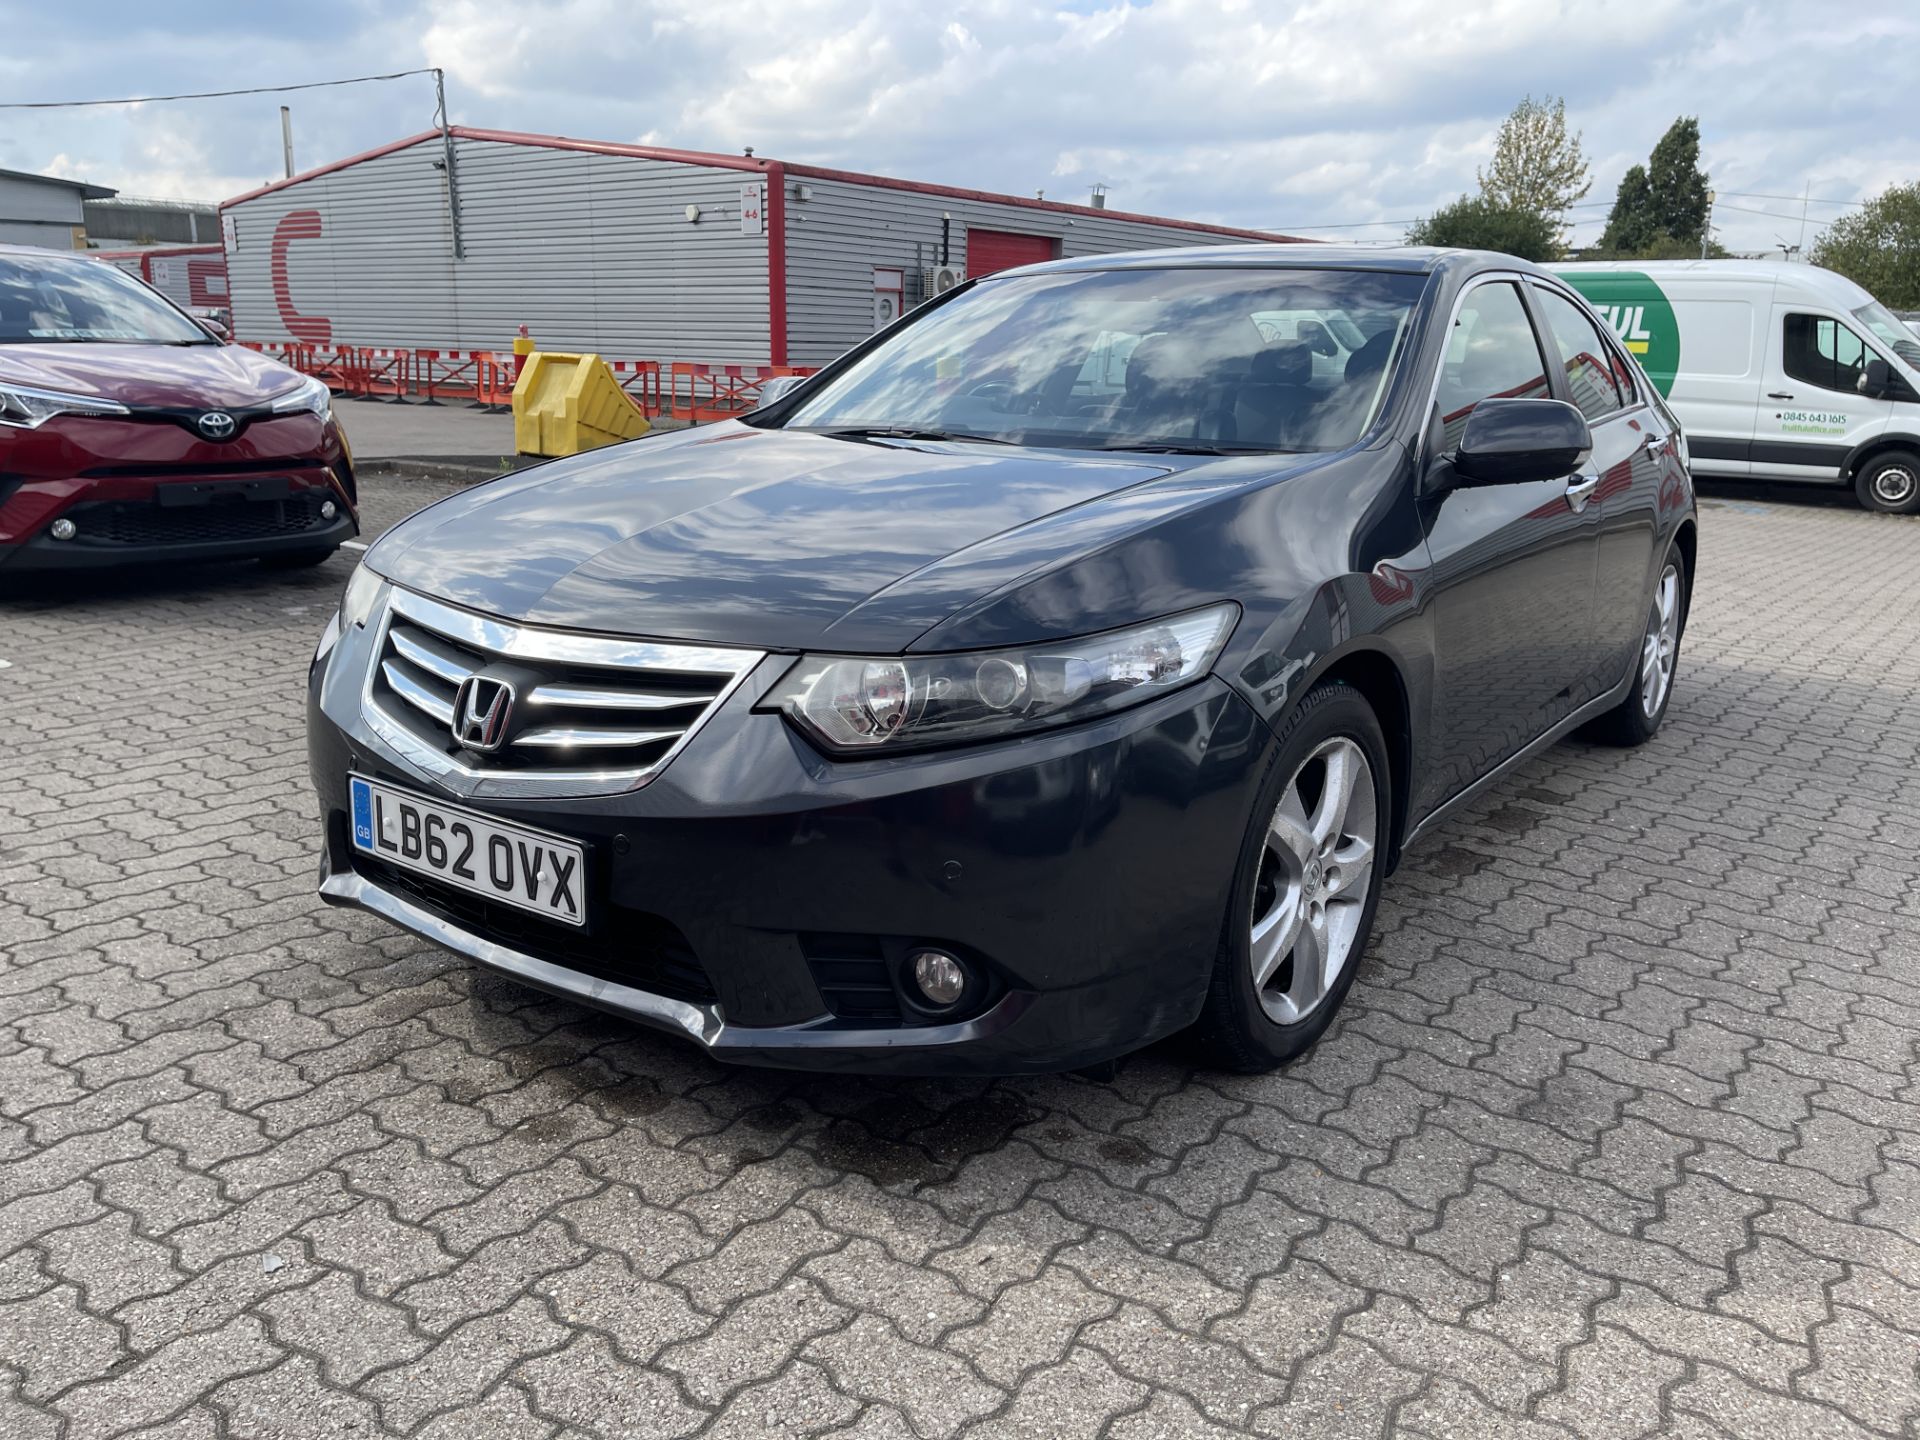 Honda Accord EX-I - VTEC Automatic - LB62 OVX - Clean Air Charge Exempt - Image 3 of 28